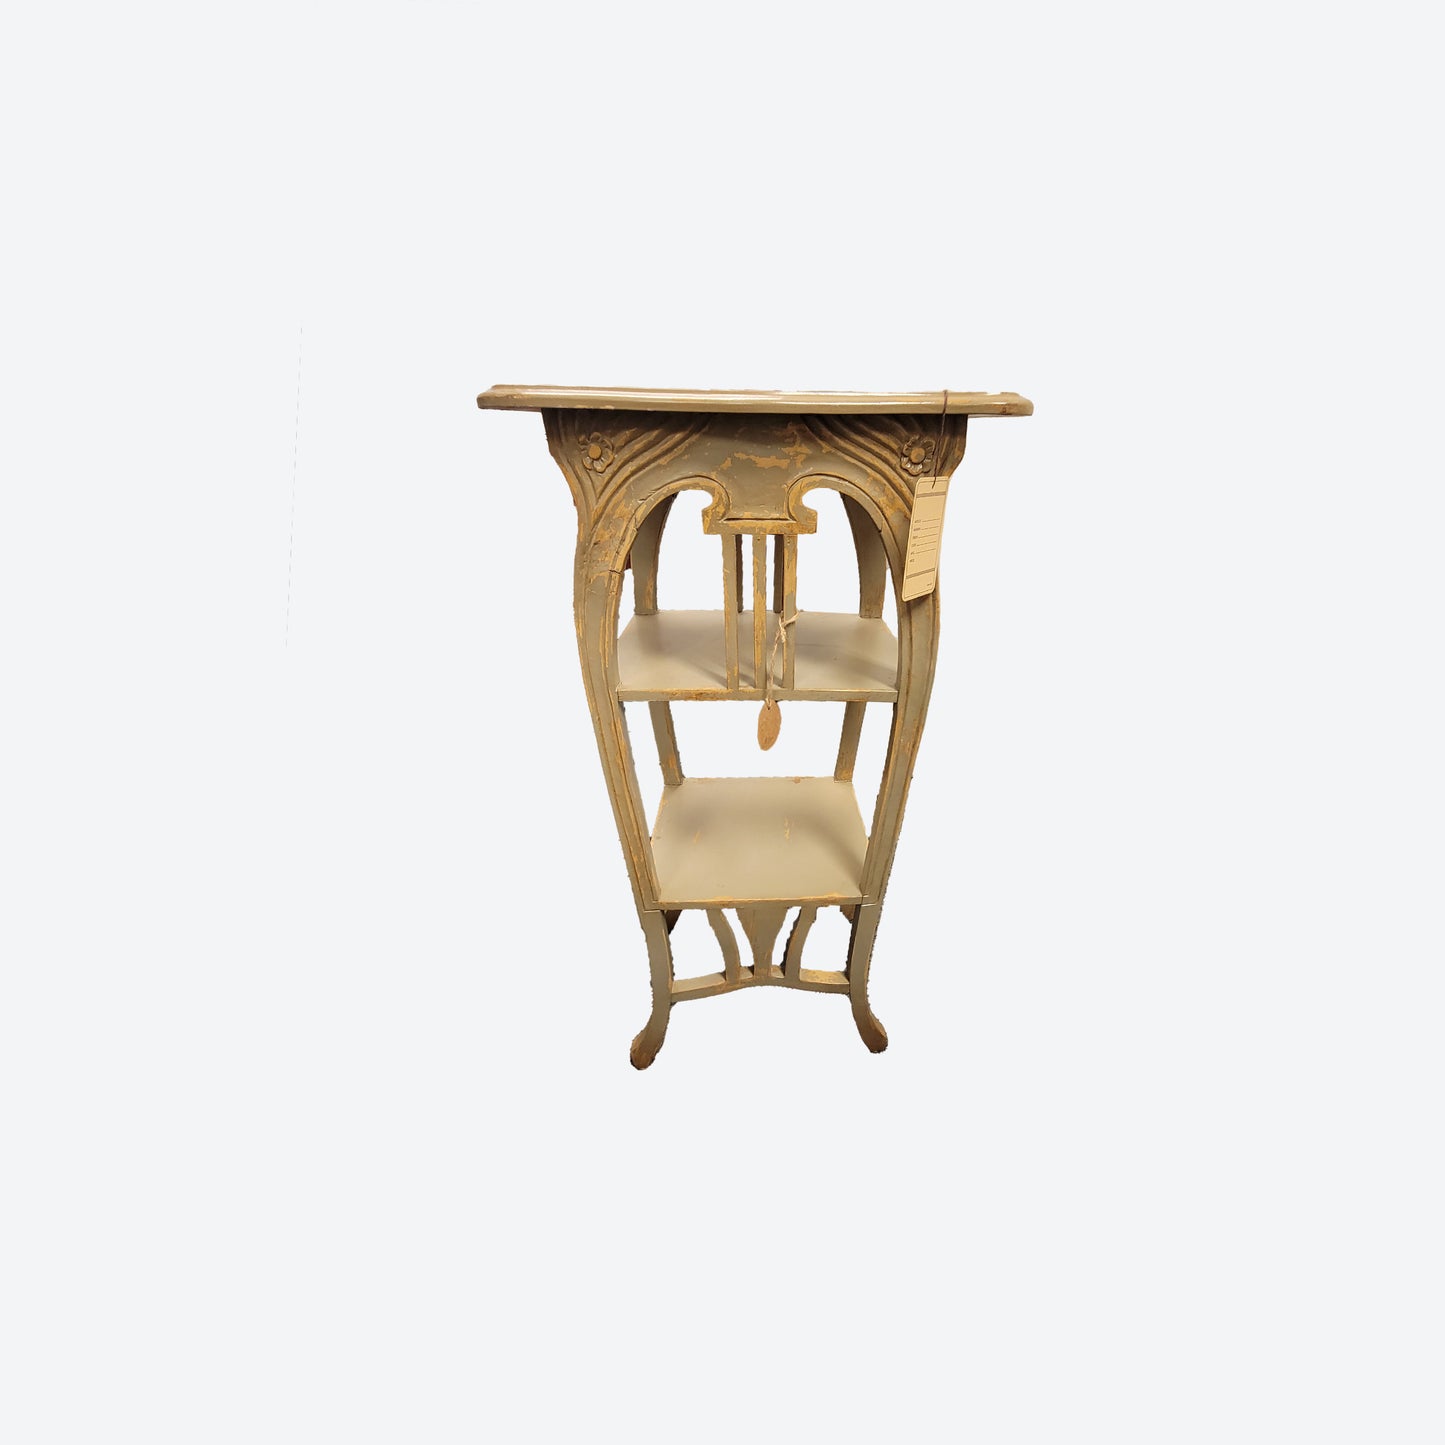 Light GREEN [ AND LIGHT BROWN ACCENTS]  RUSTIC SIDE/ ACCENT TABLE WITH CARVED ACCENTS -SK- SKU 1130